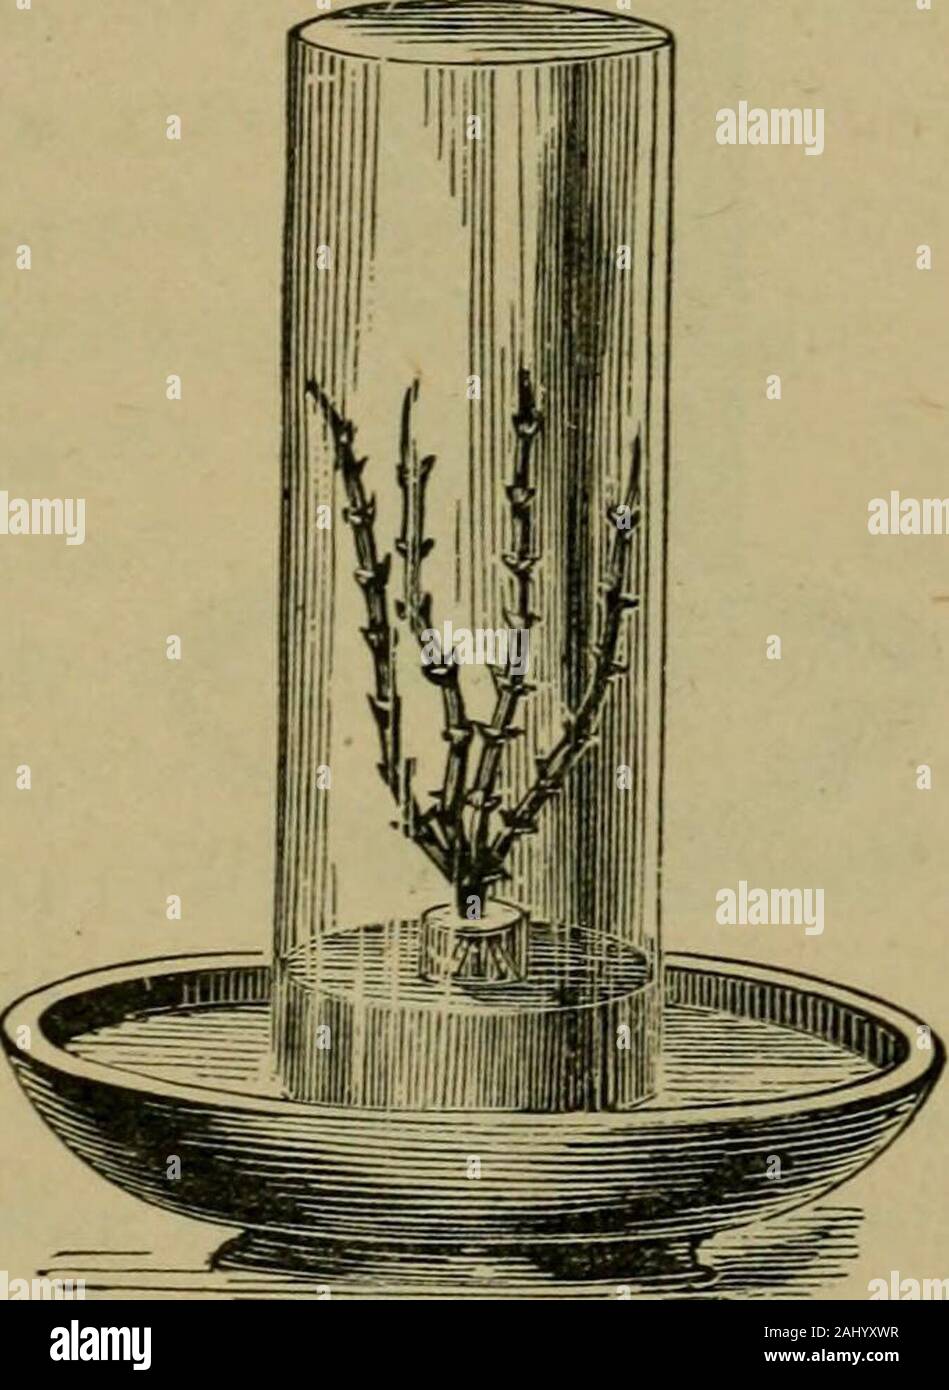 How crops feed; a treatise on the atmosphere and the soil as related to the nutrition of agricultural plants . ple, etc.) cutin spring-time just before thebuds should unfold were placedunder a bell-o-lass containinsrcommon air, as in fig. 1. Theircut extremities stood in waterlieLl in a small vessel, while theair of tlie bell was separatedfrom the external atmosphere bythe mercury containe&lt;l in thelarge basin. Thus situated, thebuds opened as in the free air,and oxygen gas was found to beconsumed in considerable quan- Fig. 1. tity. When, however, the twigs Avere confined in anatmosphere of Stock Photo